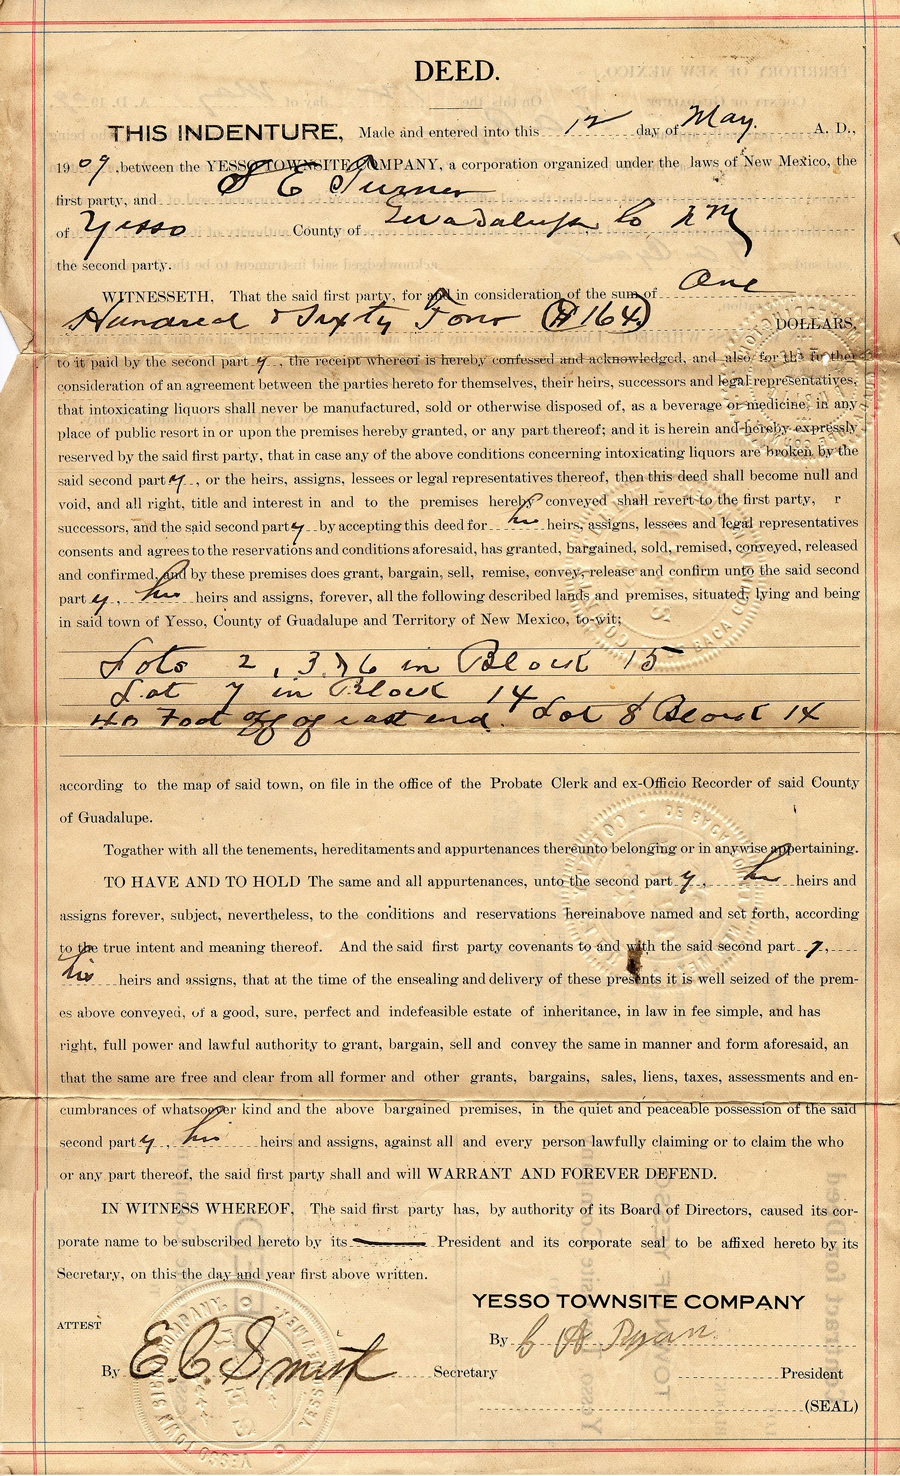 <yesso townsite company guadalupe county deed indenture 1909>